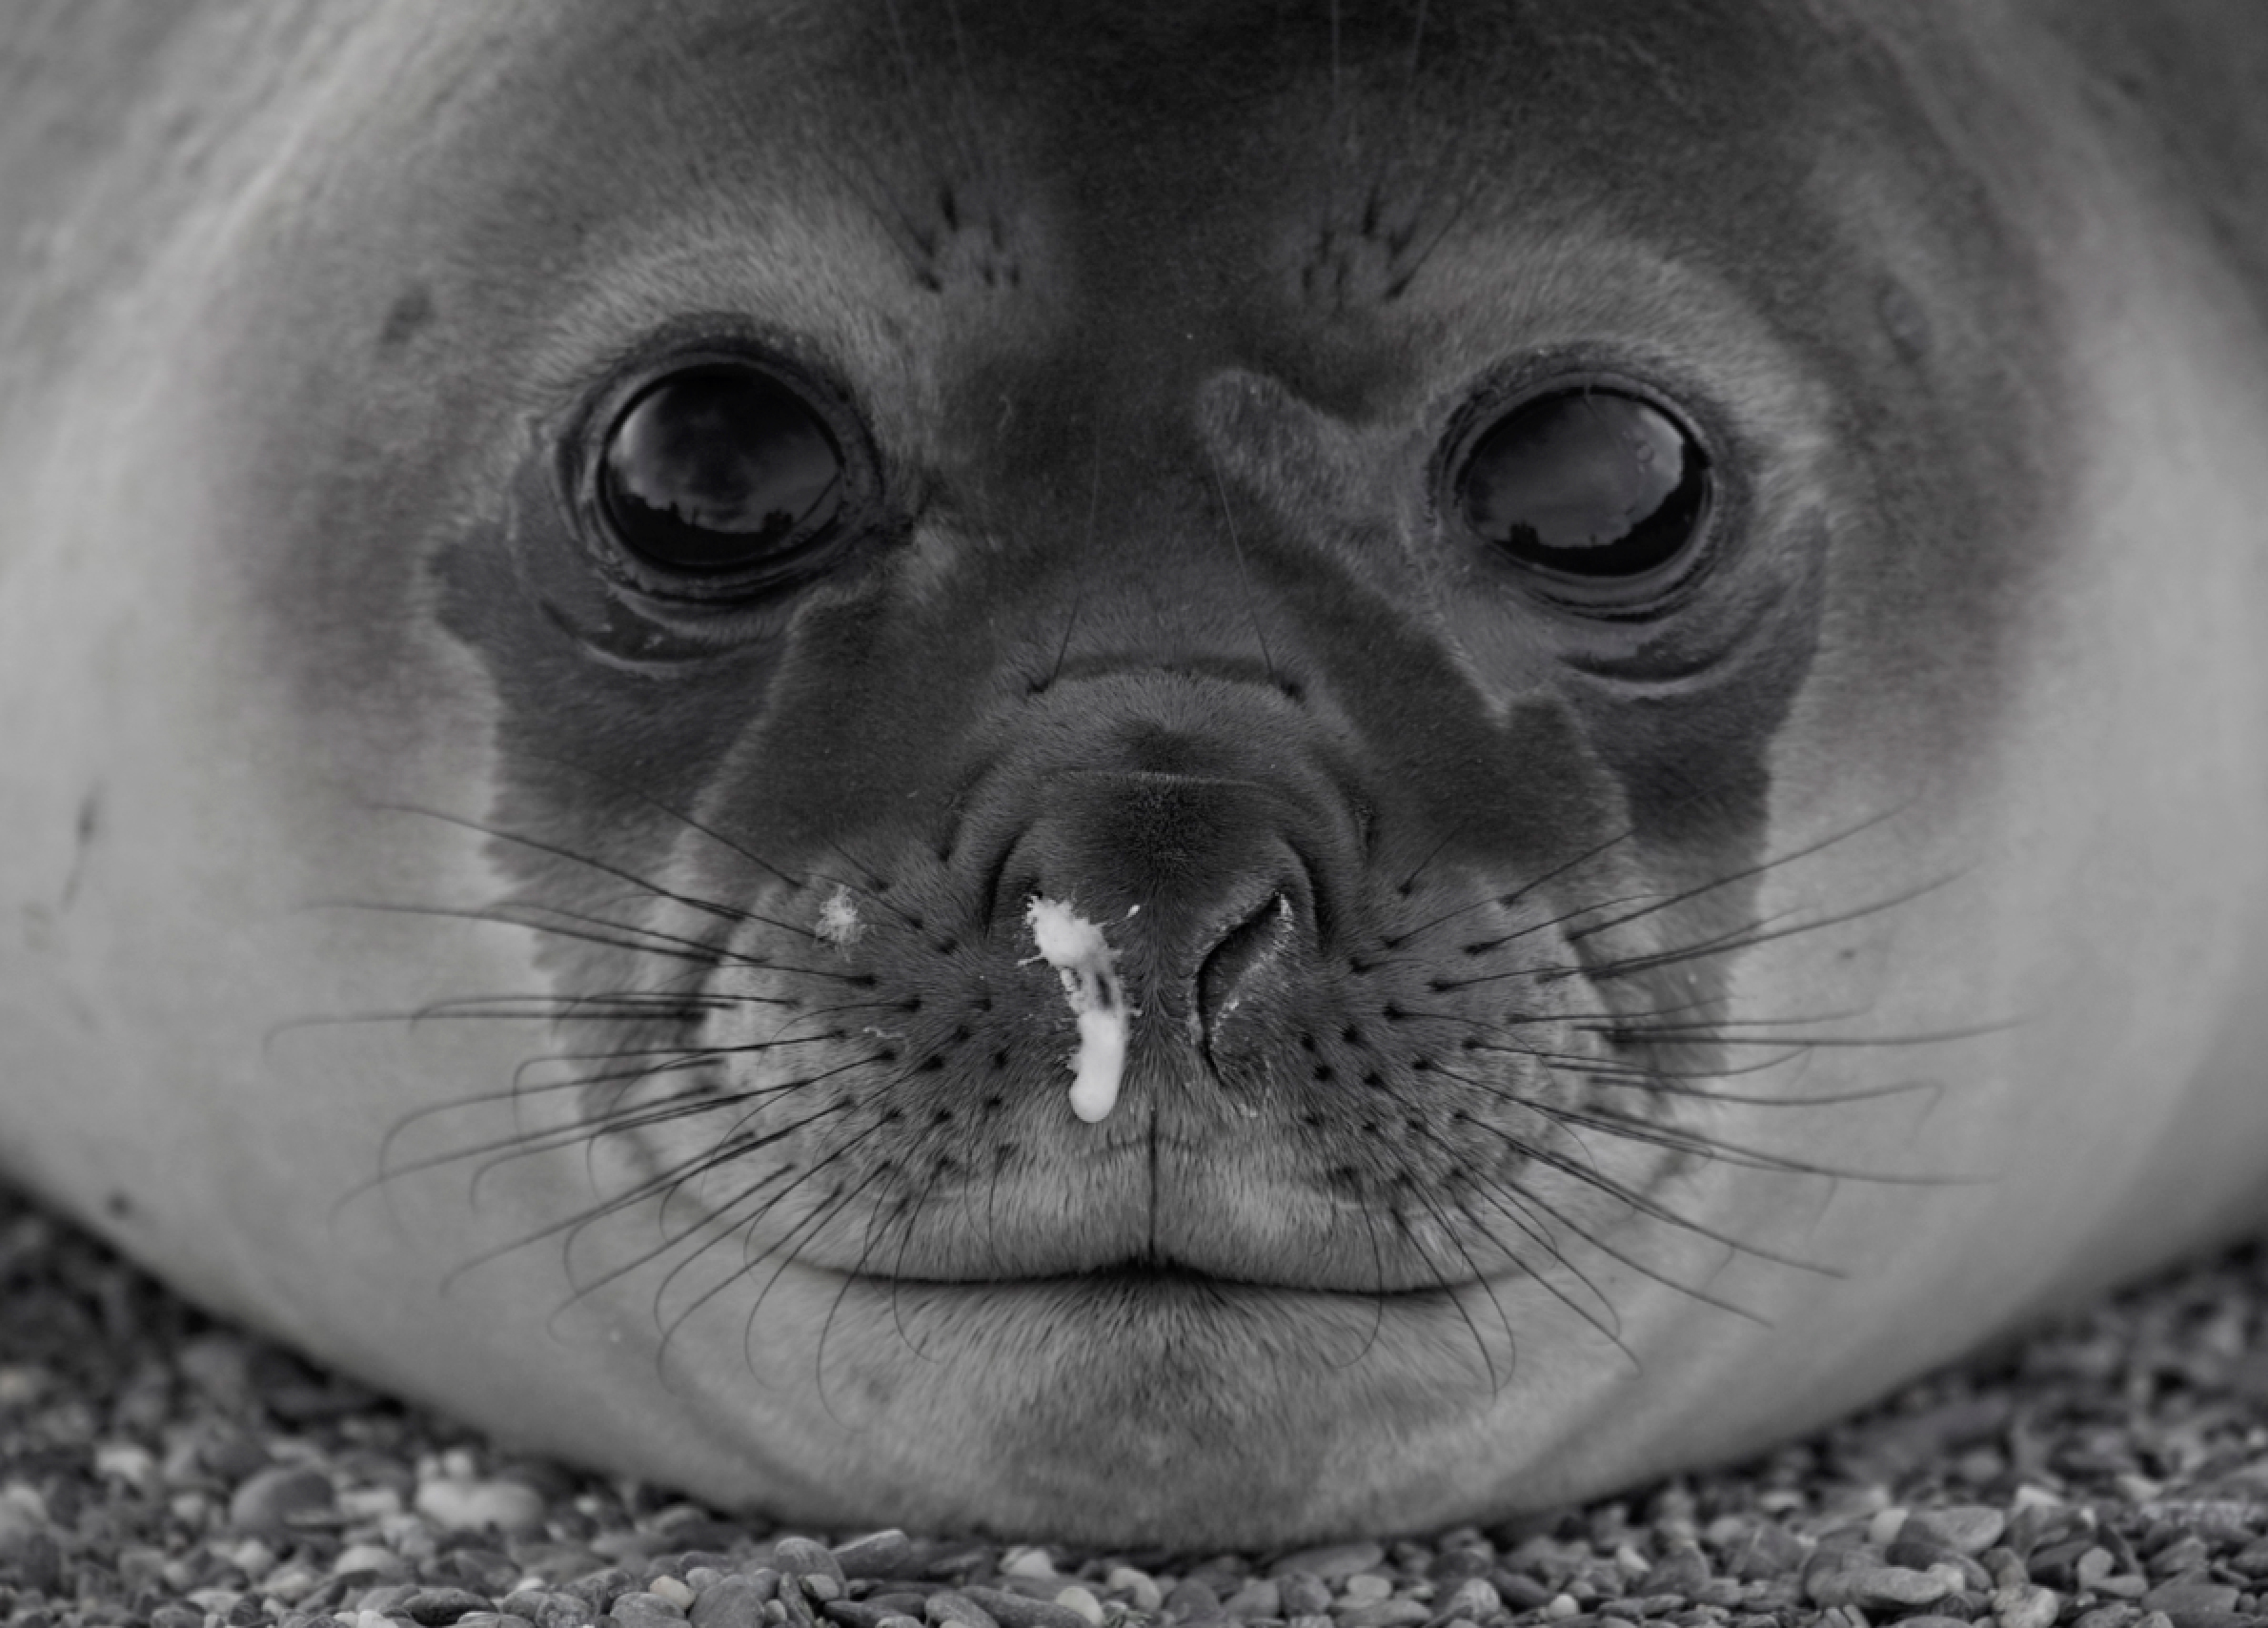 A seal peers into the camera, its face nearly symmetrical but for one noticeable difference that captures the viewer’s attention.